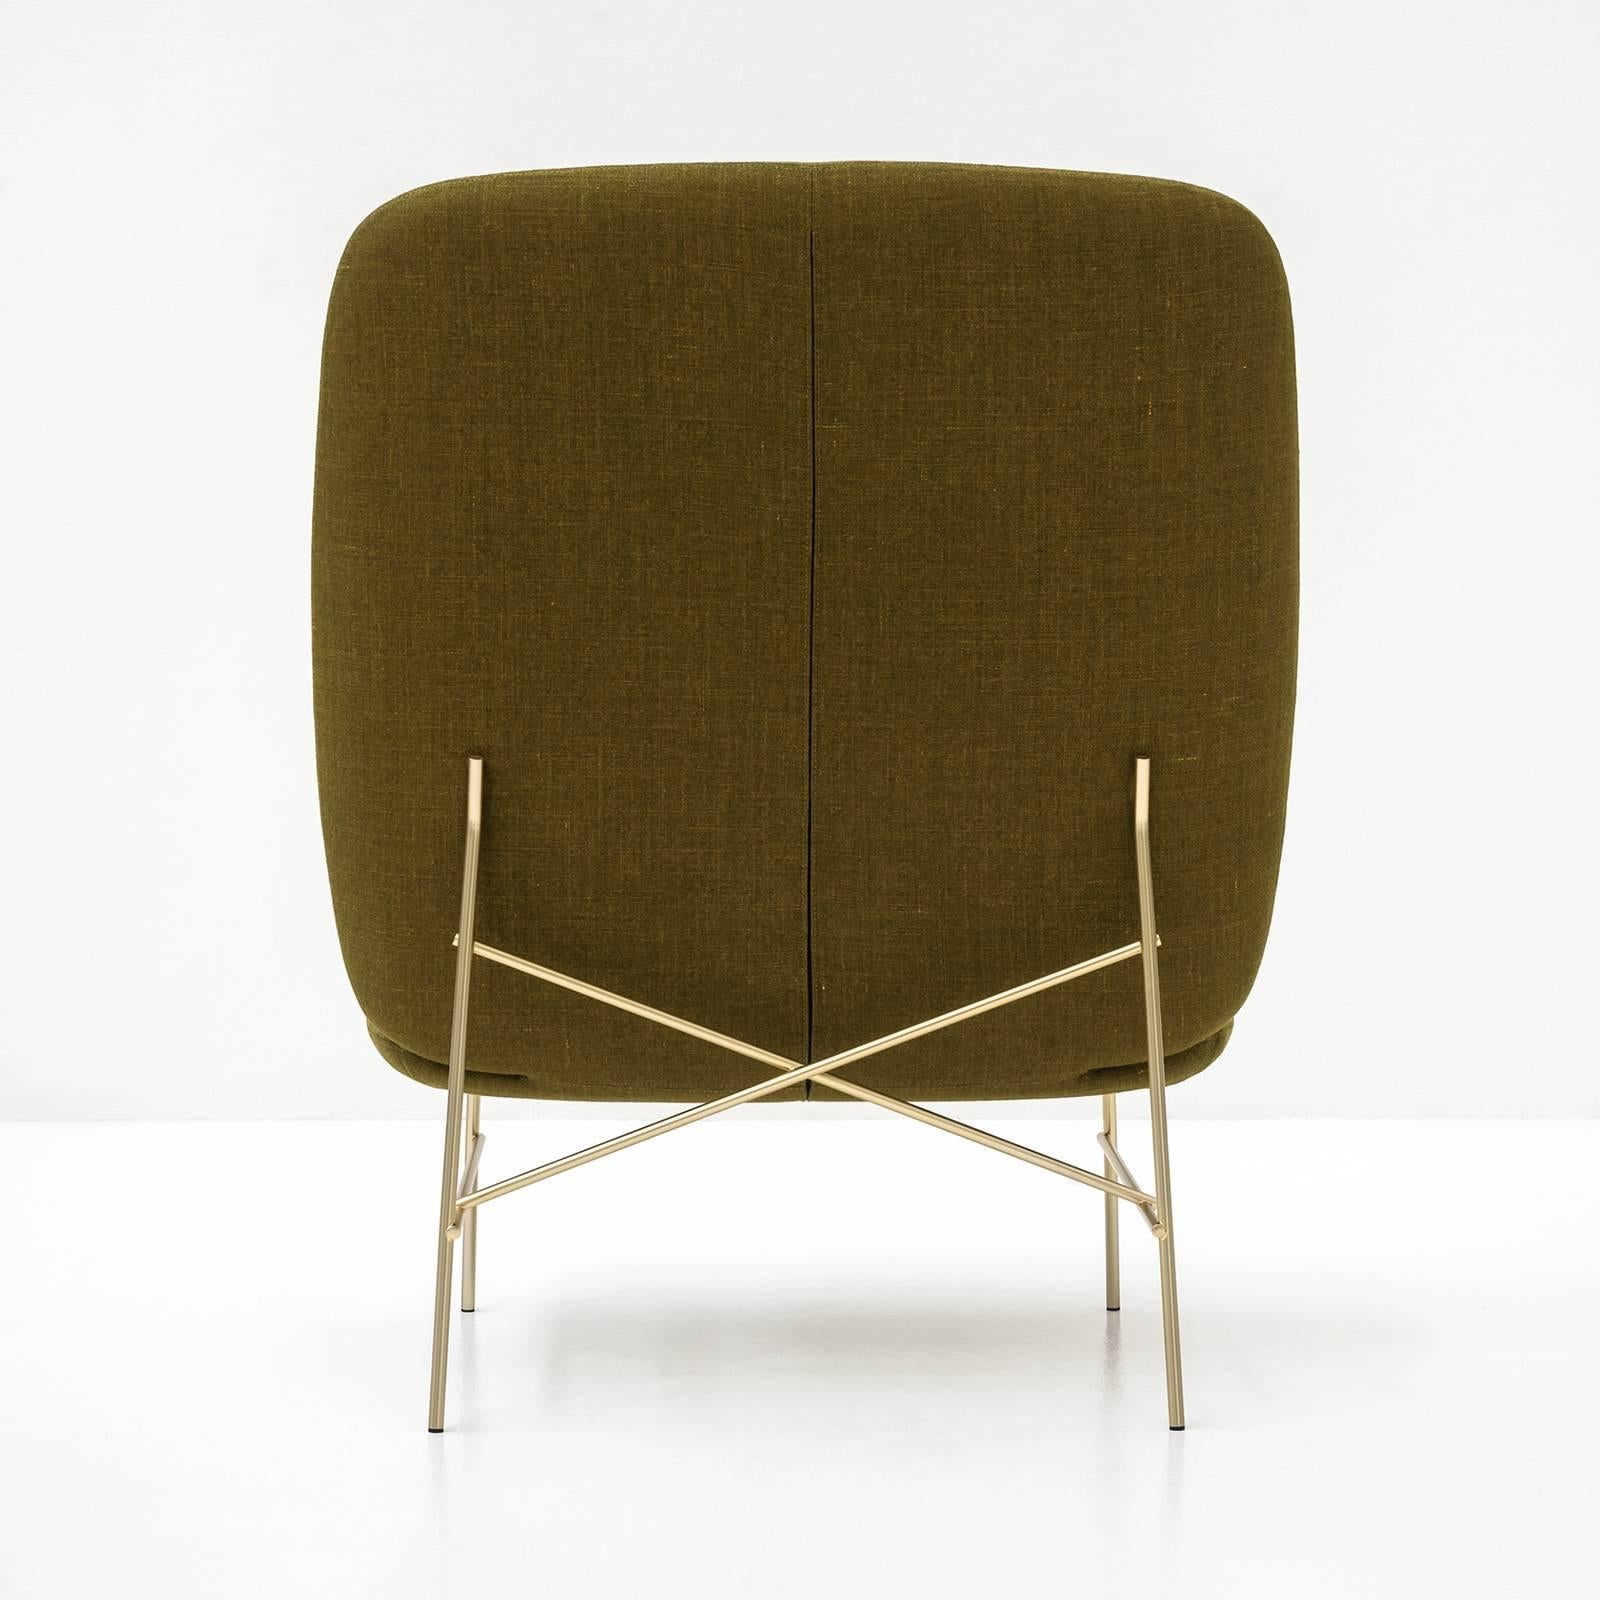 Part of the Kelly collection, designed by Swedish studio Claesson Koivisto Rune, this exquisite accent chair makes an elegant and minimalist statement, while also being a piece of furniture that is versatile and comfortable. Resting on a metal base